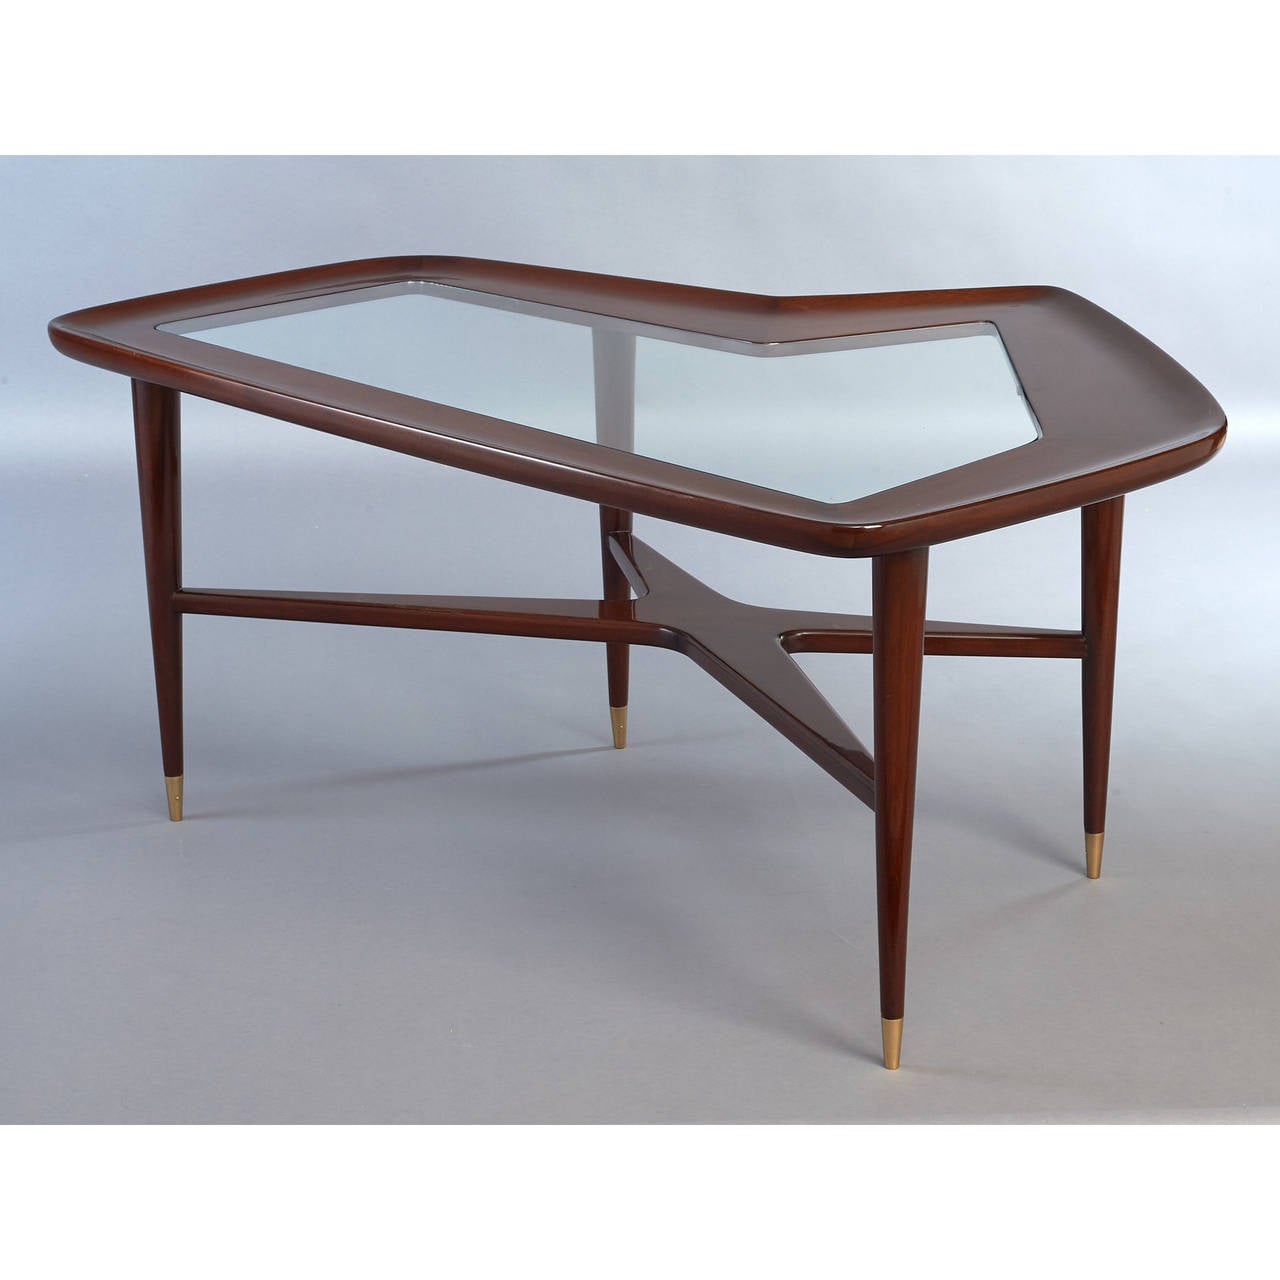 Mid-20th Century Sculptural Free-Form Italian 1950s Table